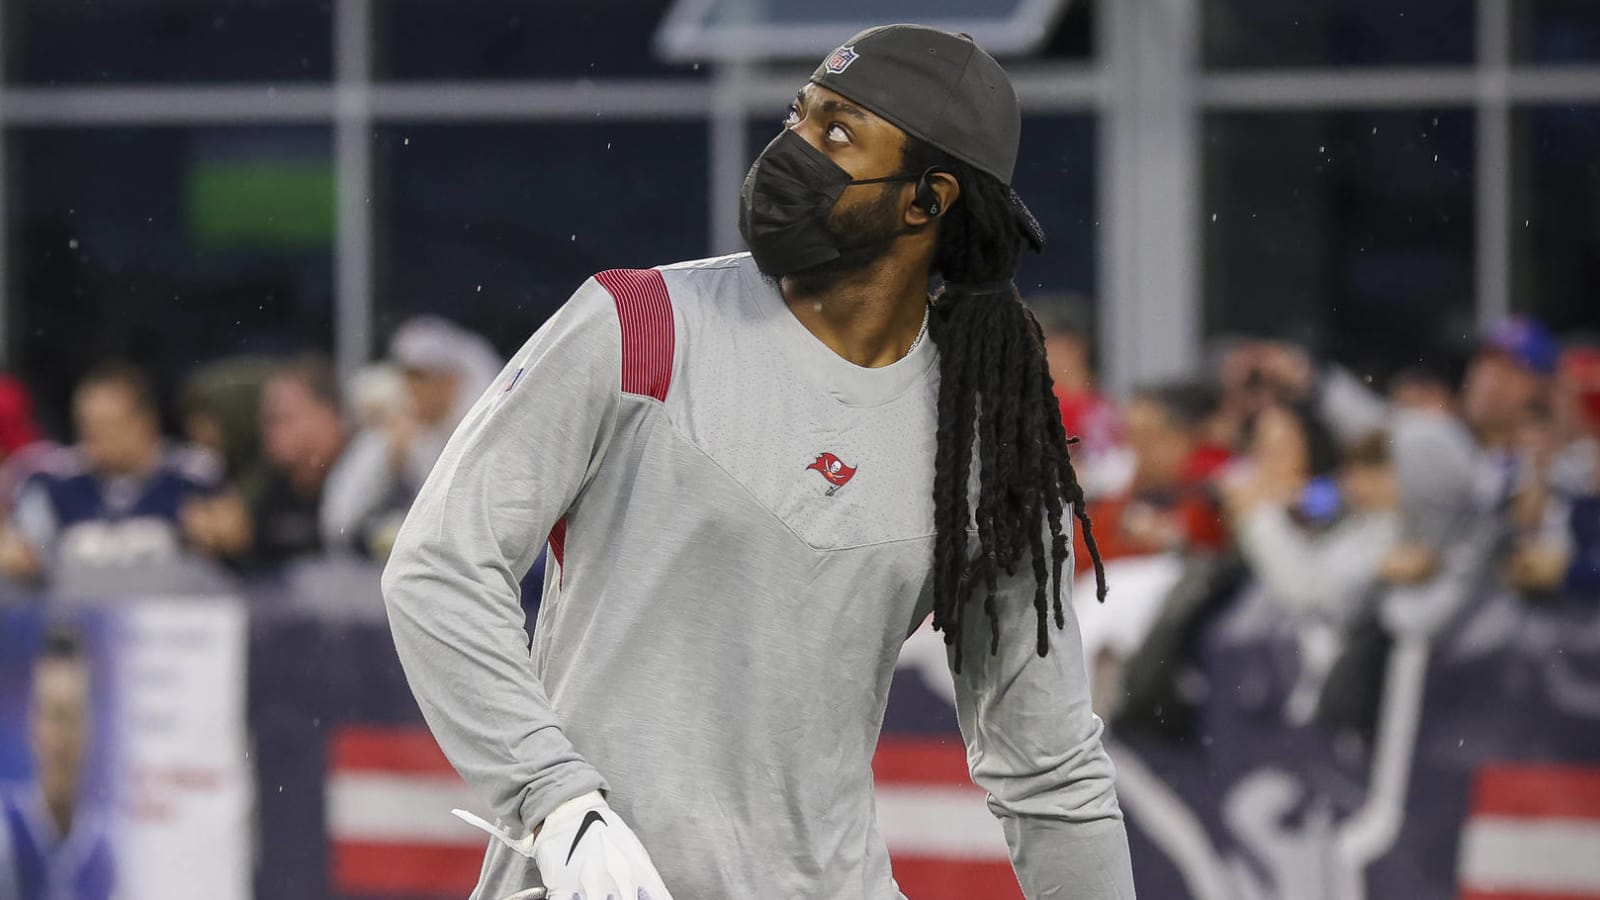 Bruce Arians: Richard Sherman played 'really well' in debut